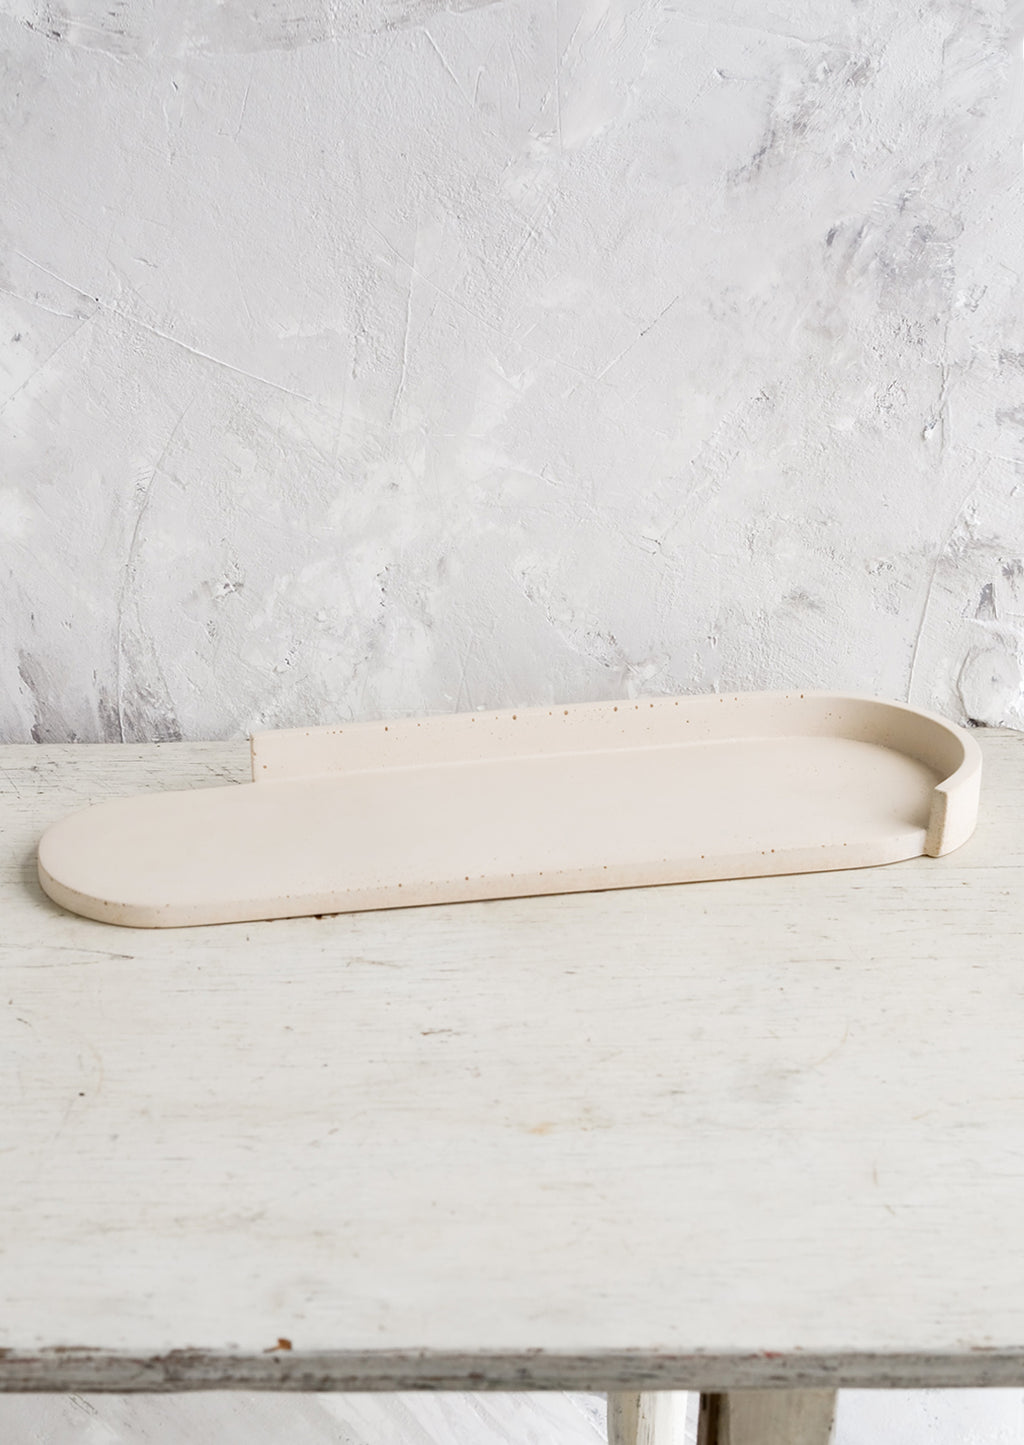 Straw: An elongated oval shaped platter made from straw colored concrete.